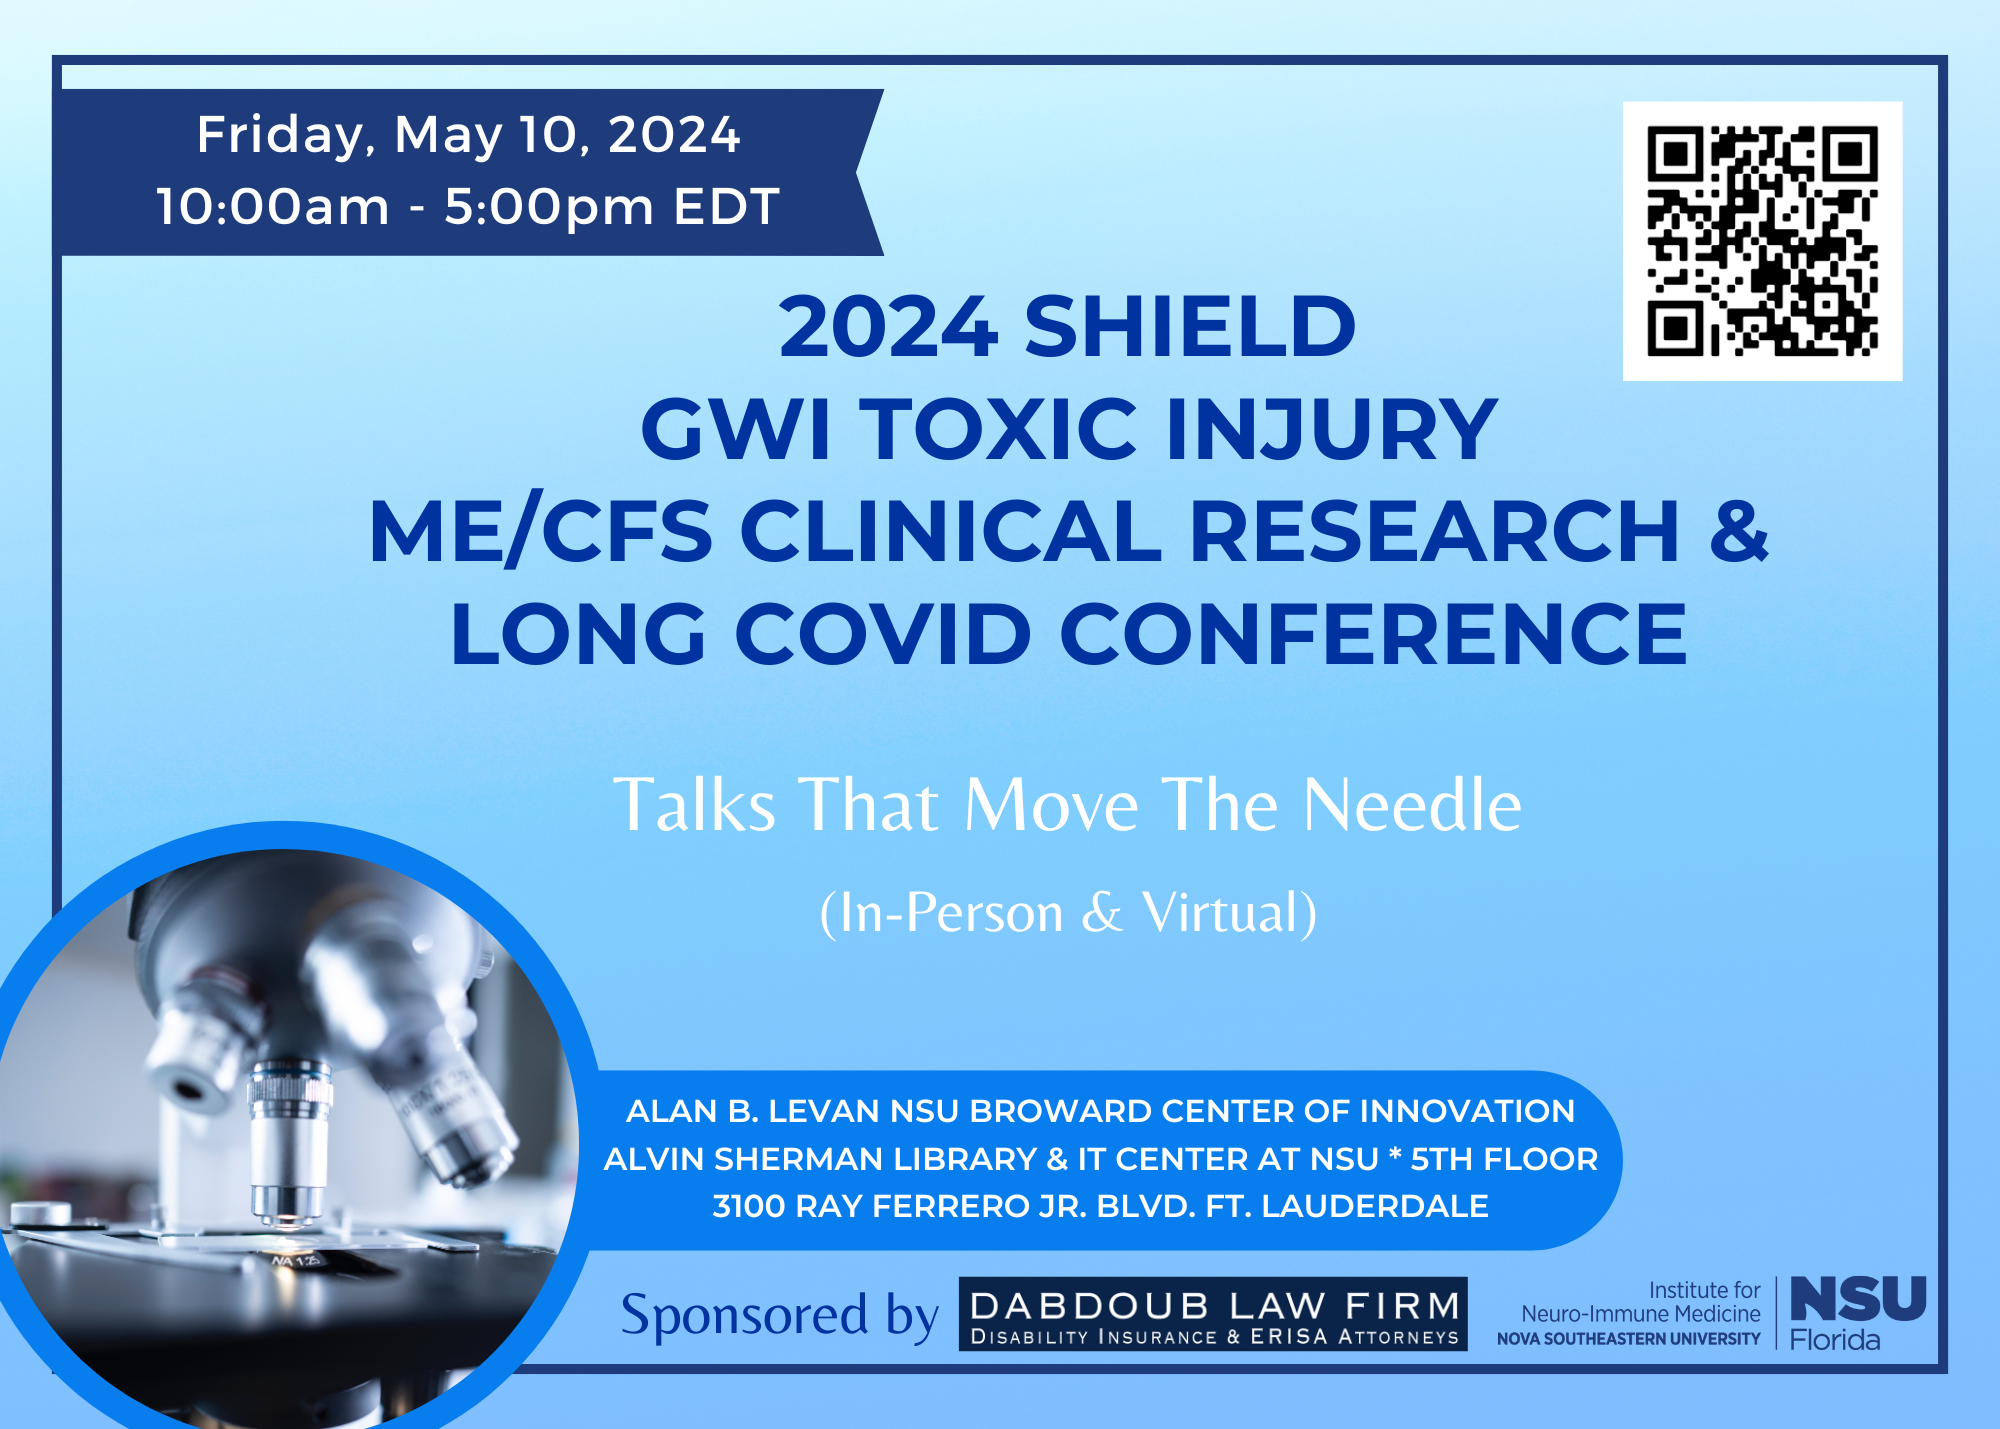 2024 Shield GWI Toxic Injury ME/CFS Clinical Research & Long COVID Conference: Talks That Move the Needle - Conference Schedule